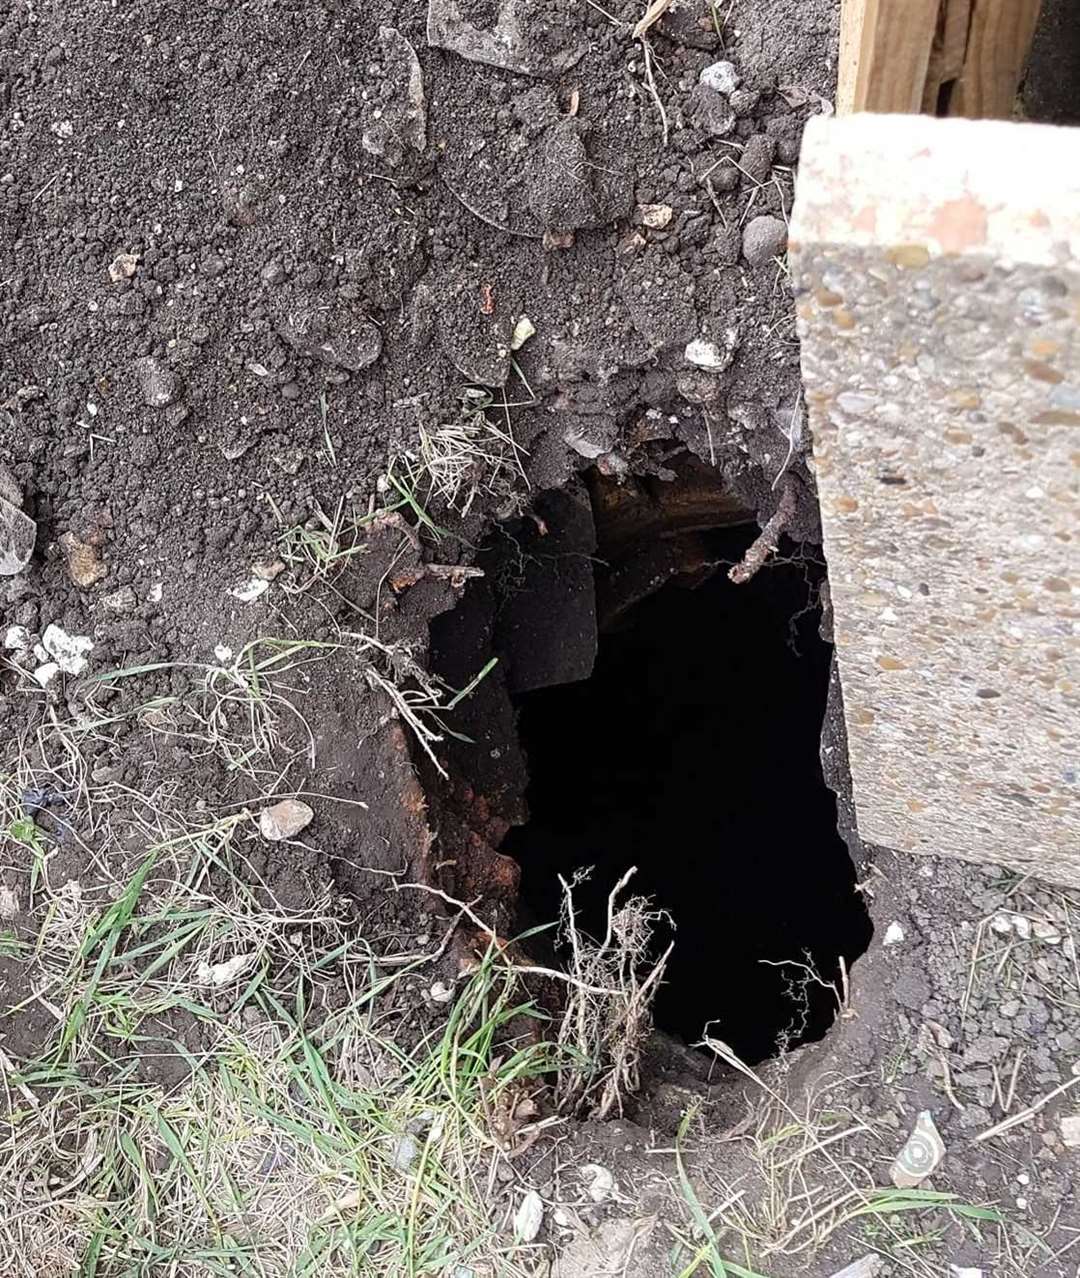 The hole was found while a fence post was being installed. Picture: Lara Ann Peters